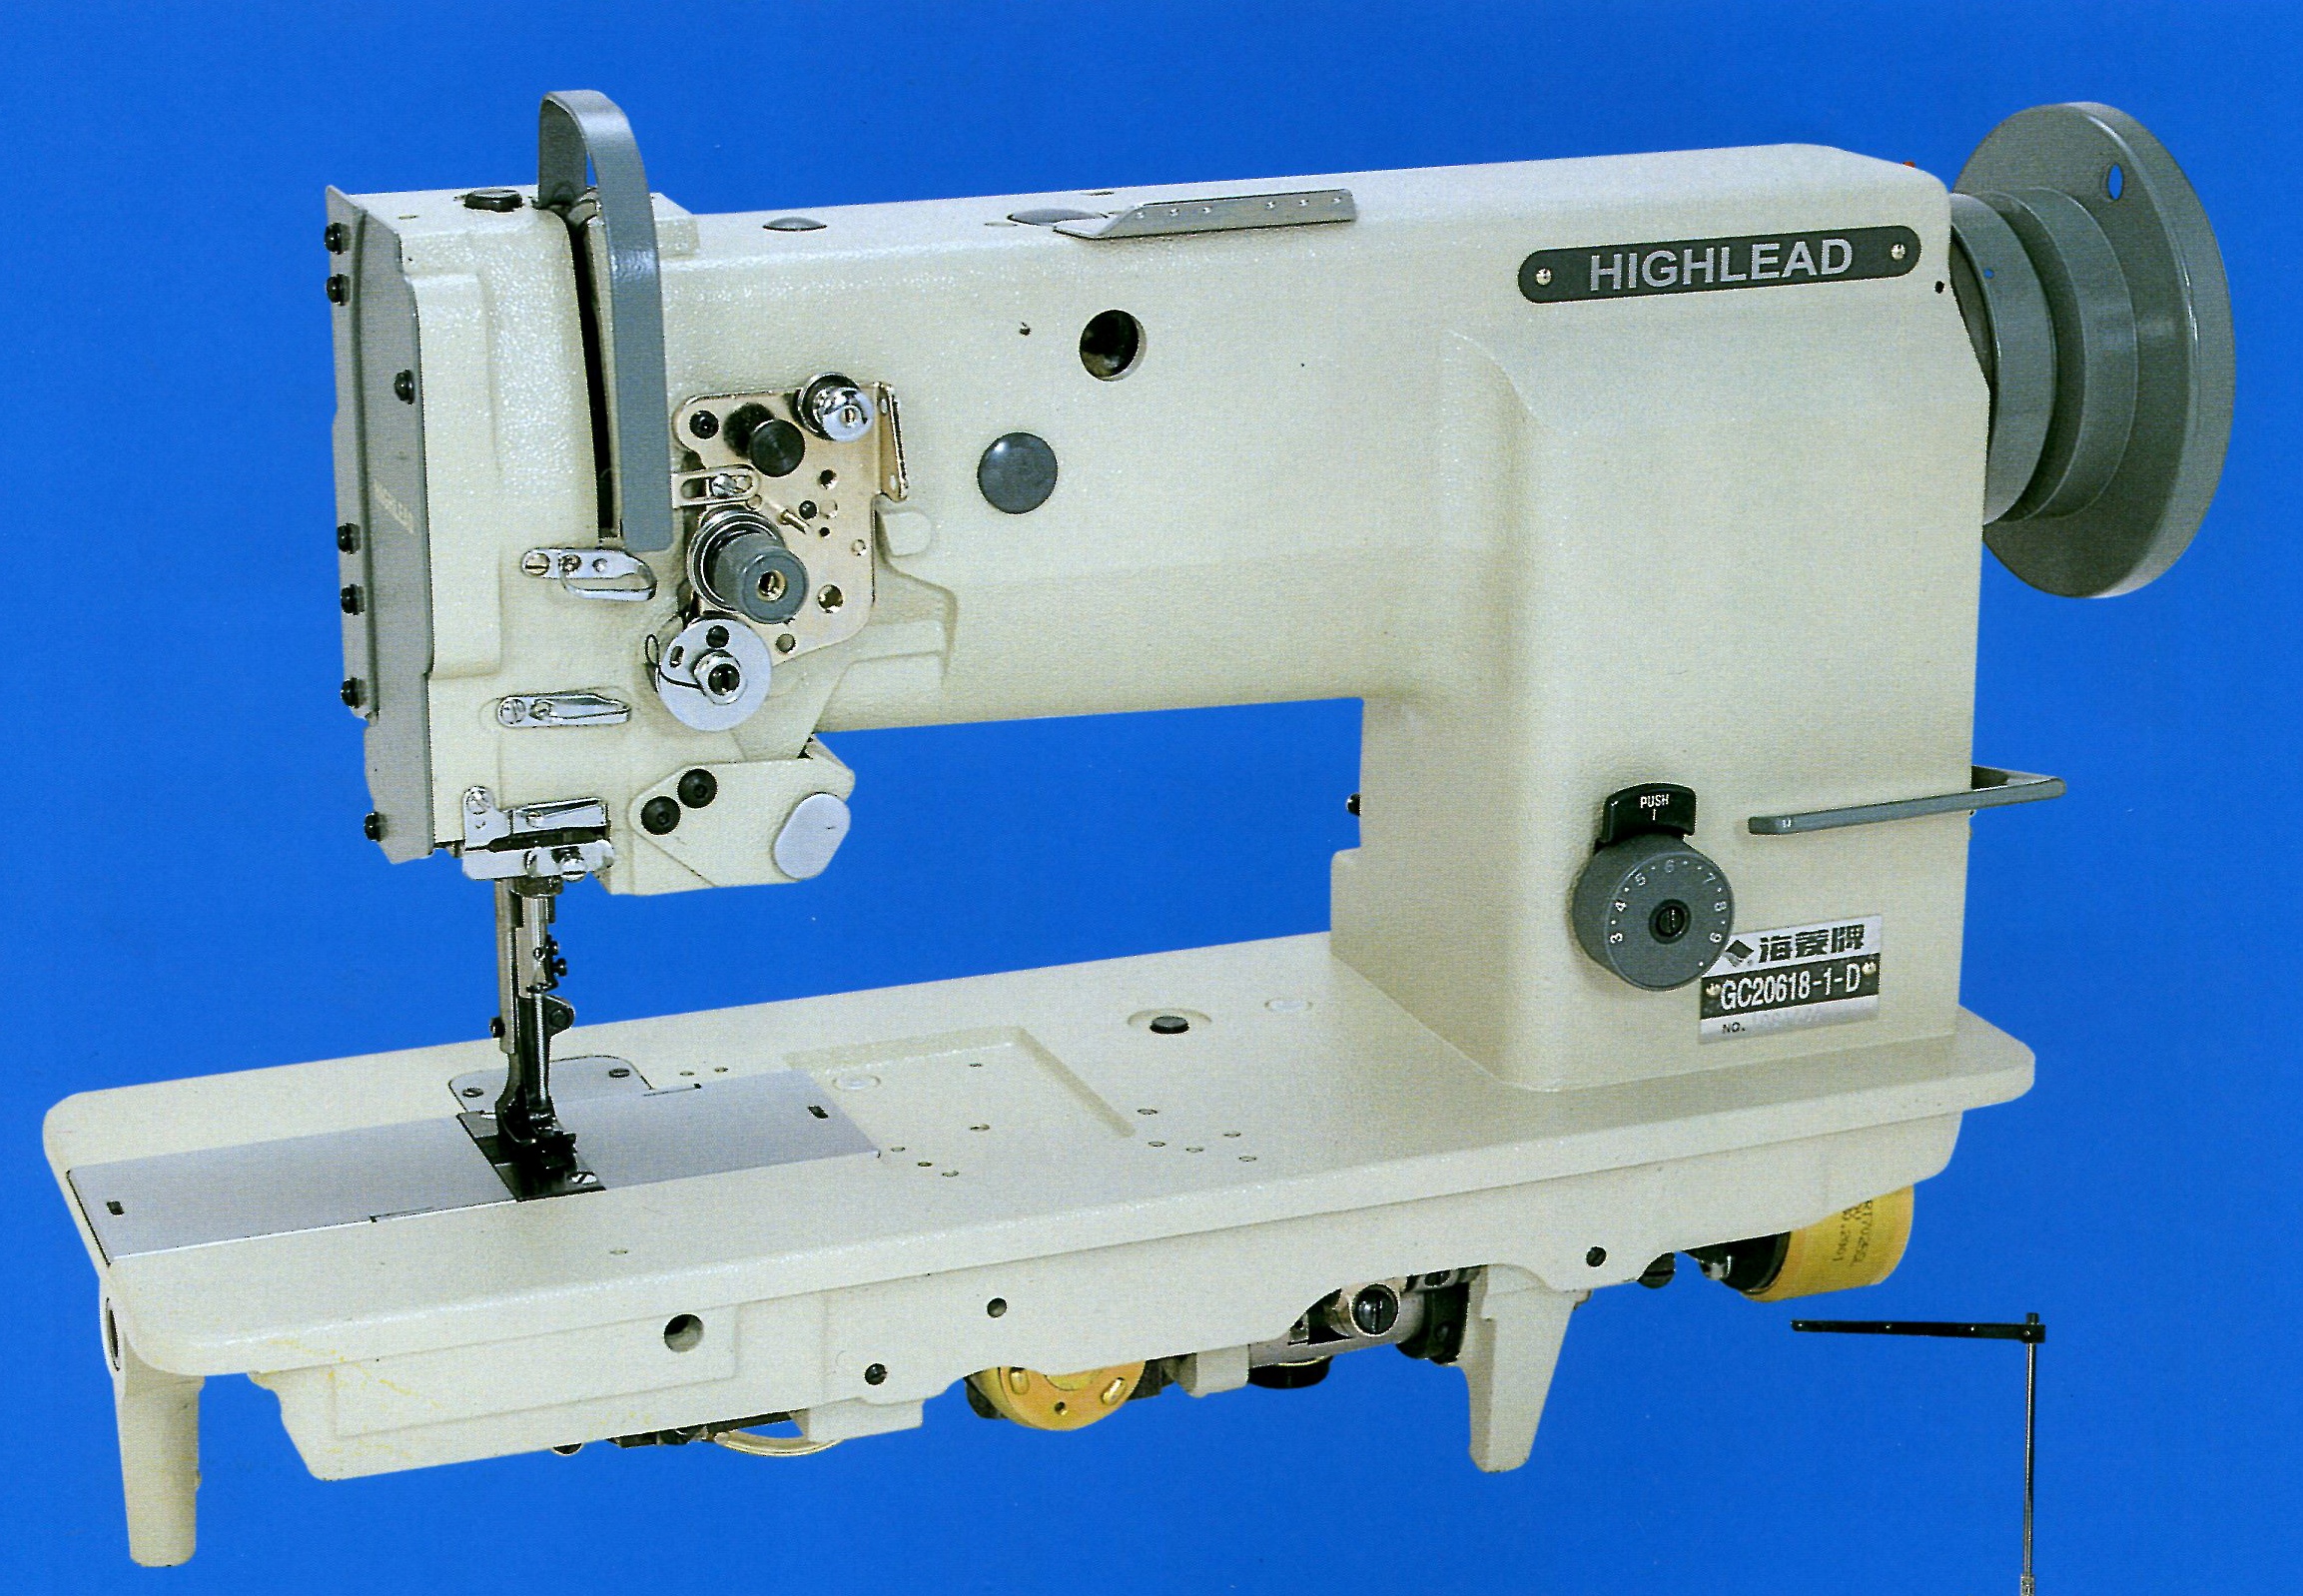 Highlead GC20618-1 & GC20618-2 Sewing Machines